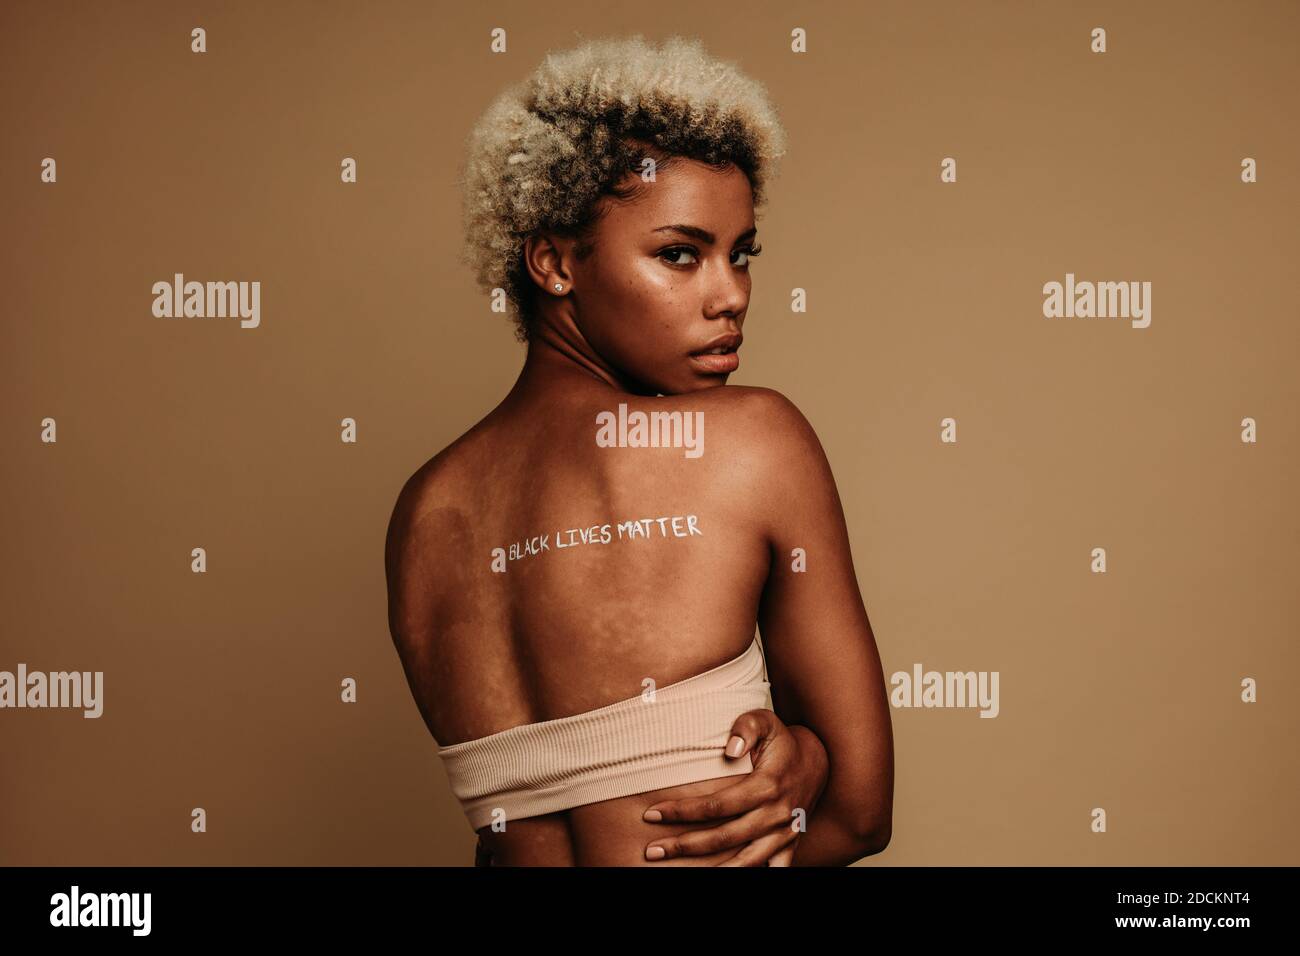 Rear view of woman standing on brown background with words black lives matter written on back. African american woman expressing anti racism views. Stock Photo